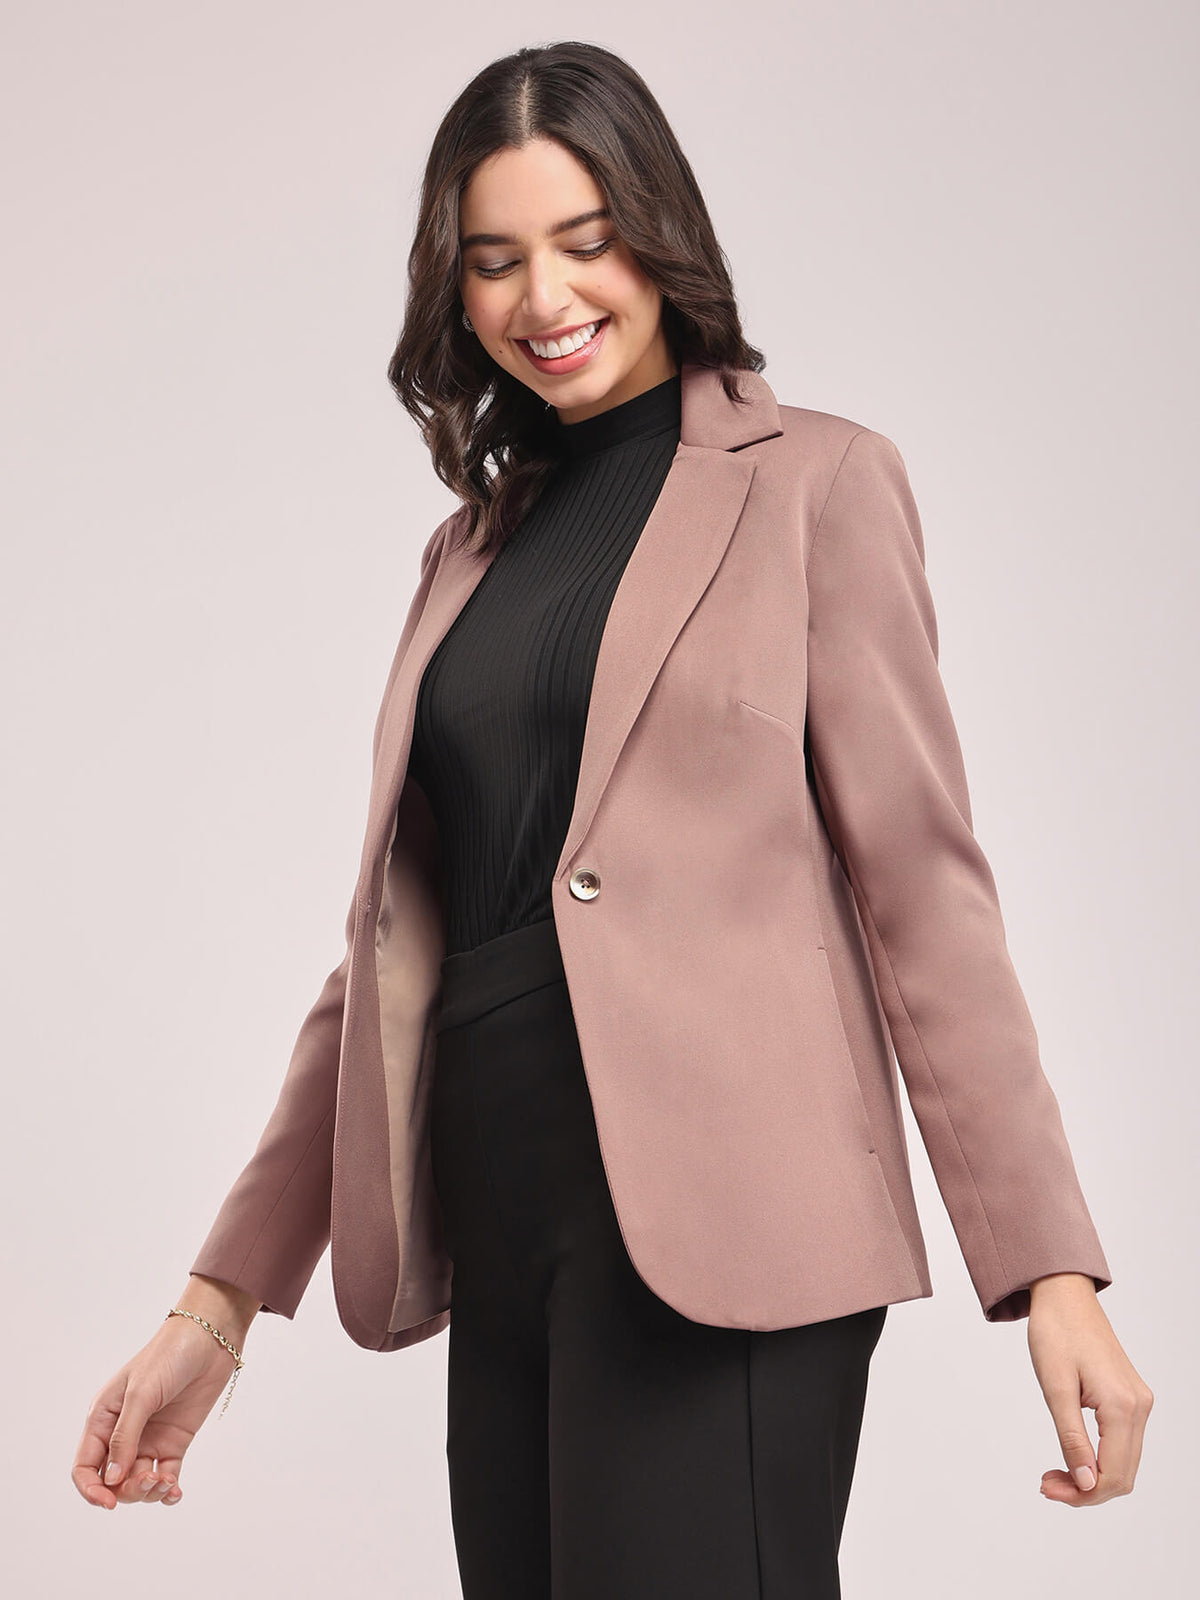 Single Breasted Blazer - Brown